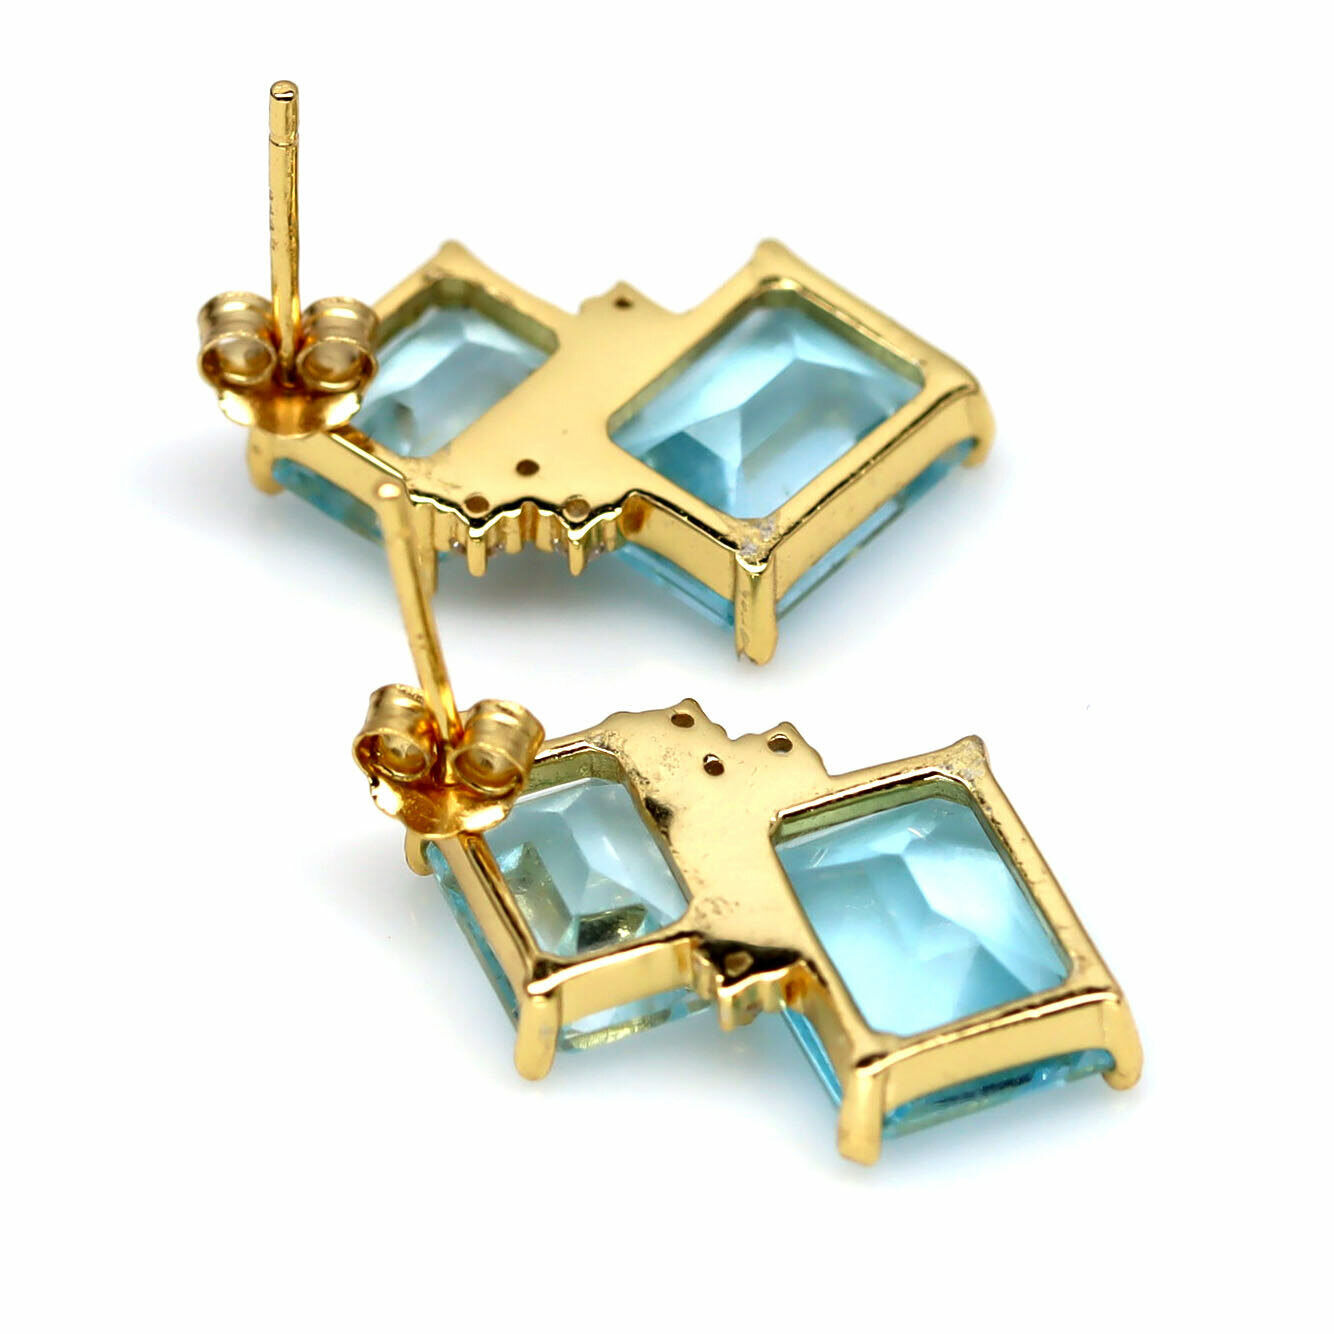 A pair of gold on 925 silver earrings set with baguette cut blue topaz, L. 2cm. - Image 3 of 3